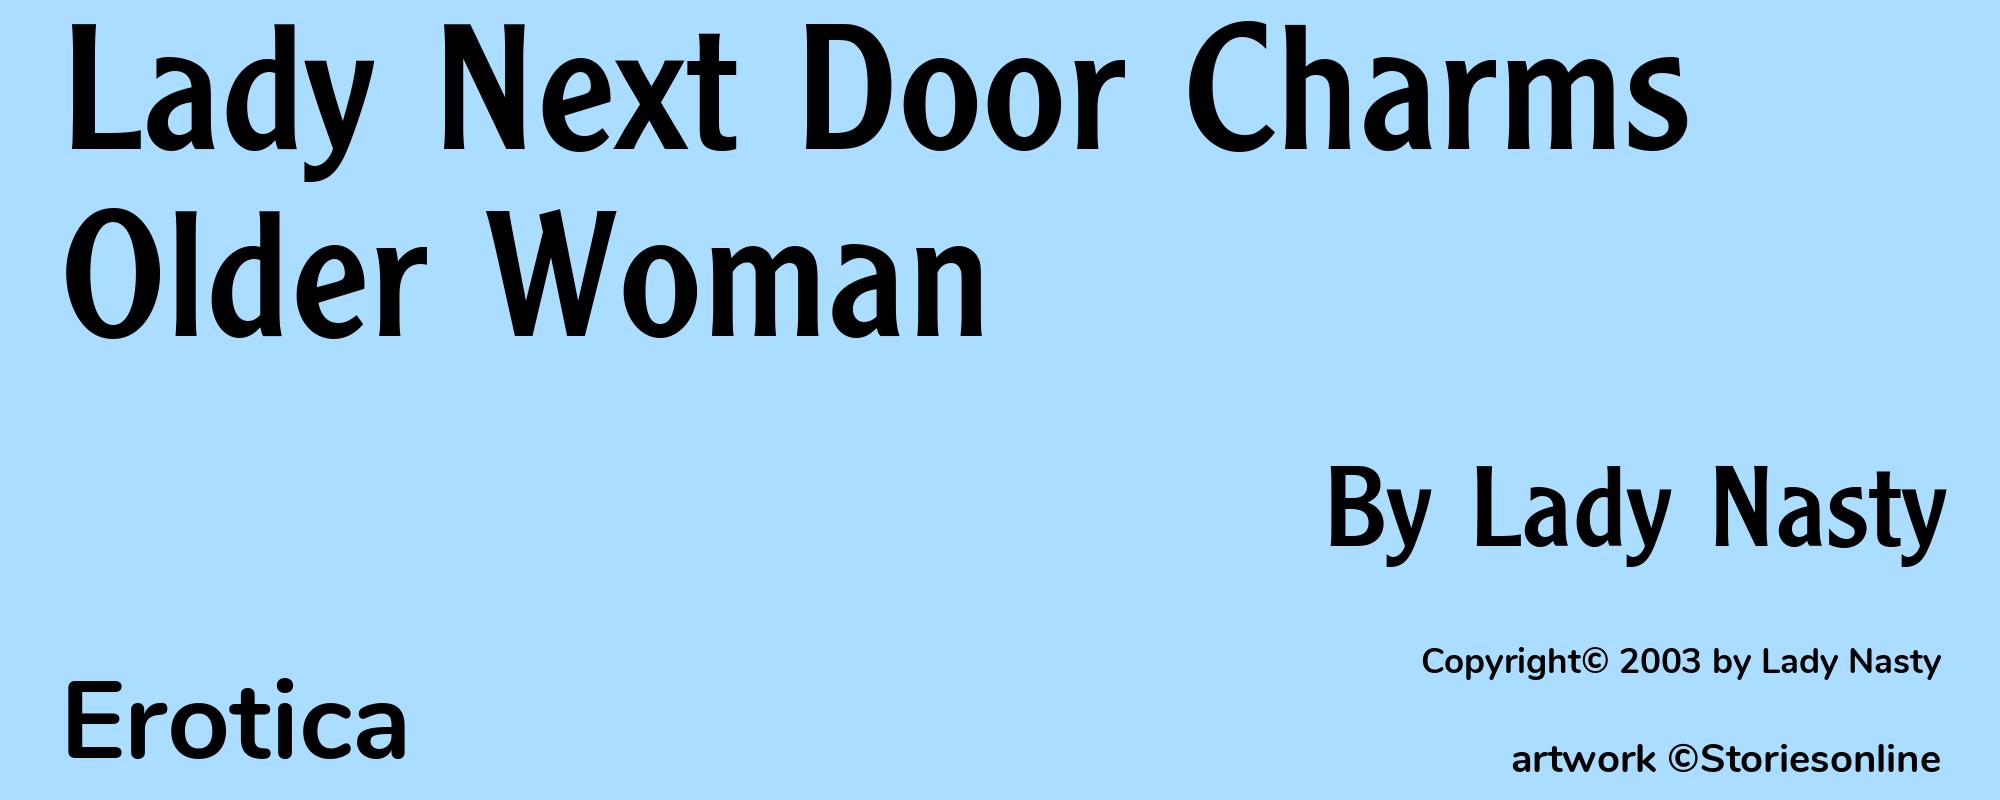 Lady Next Door Charms Older Woman - Cover